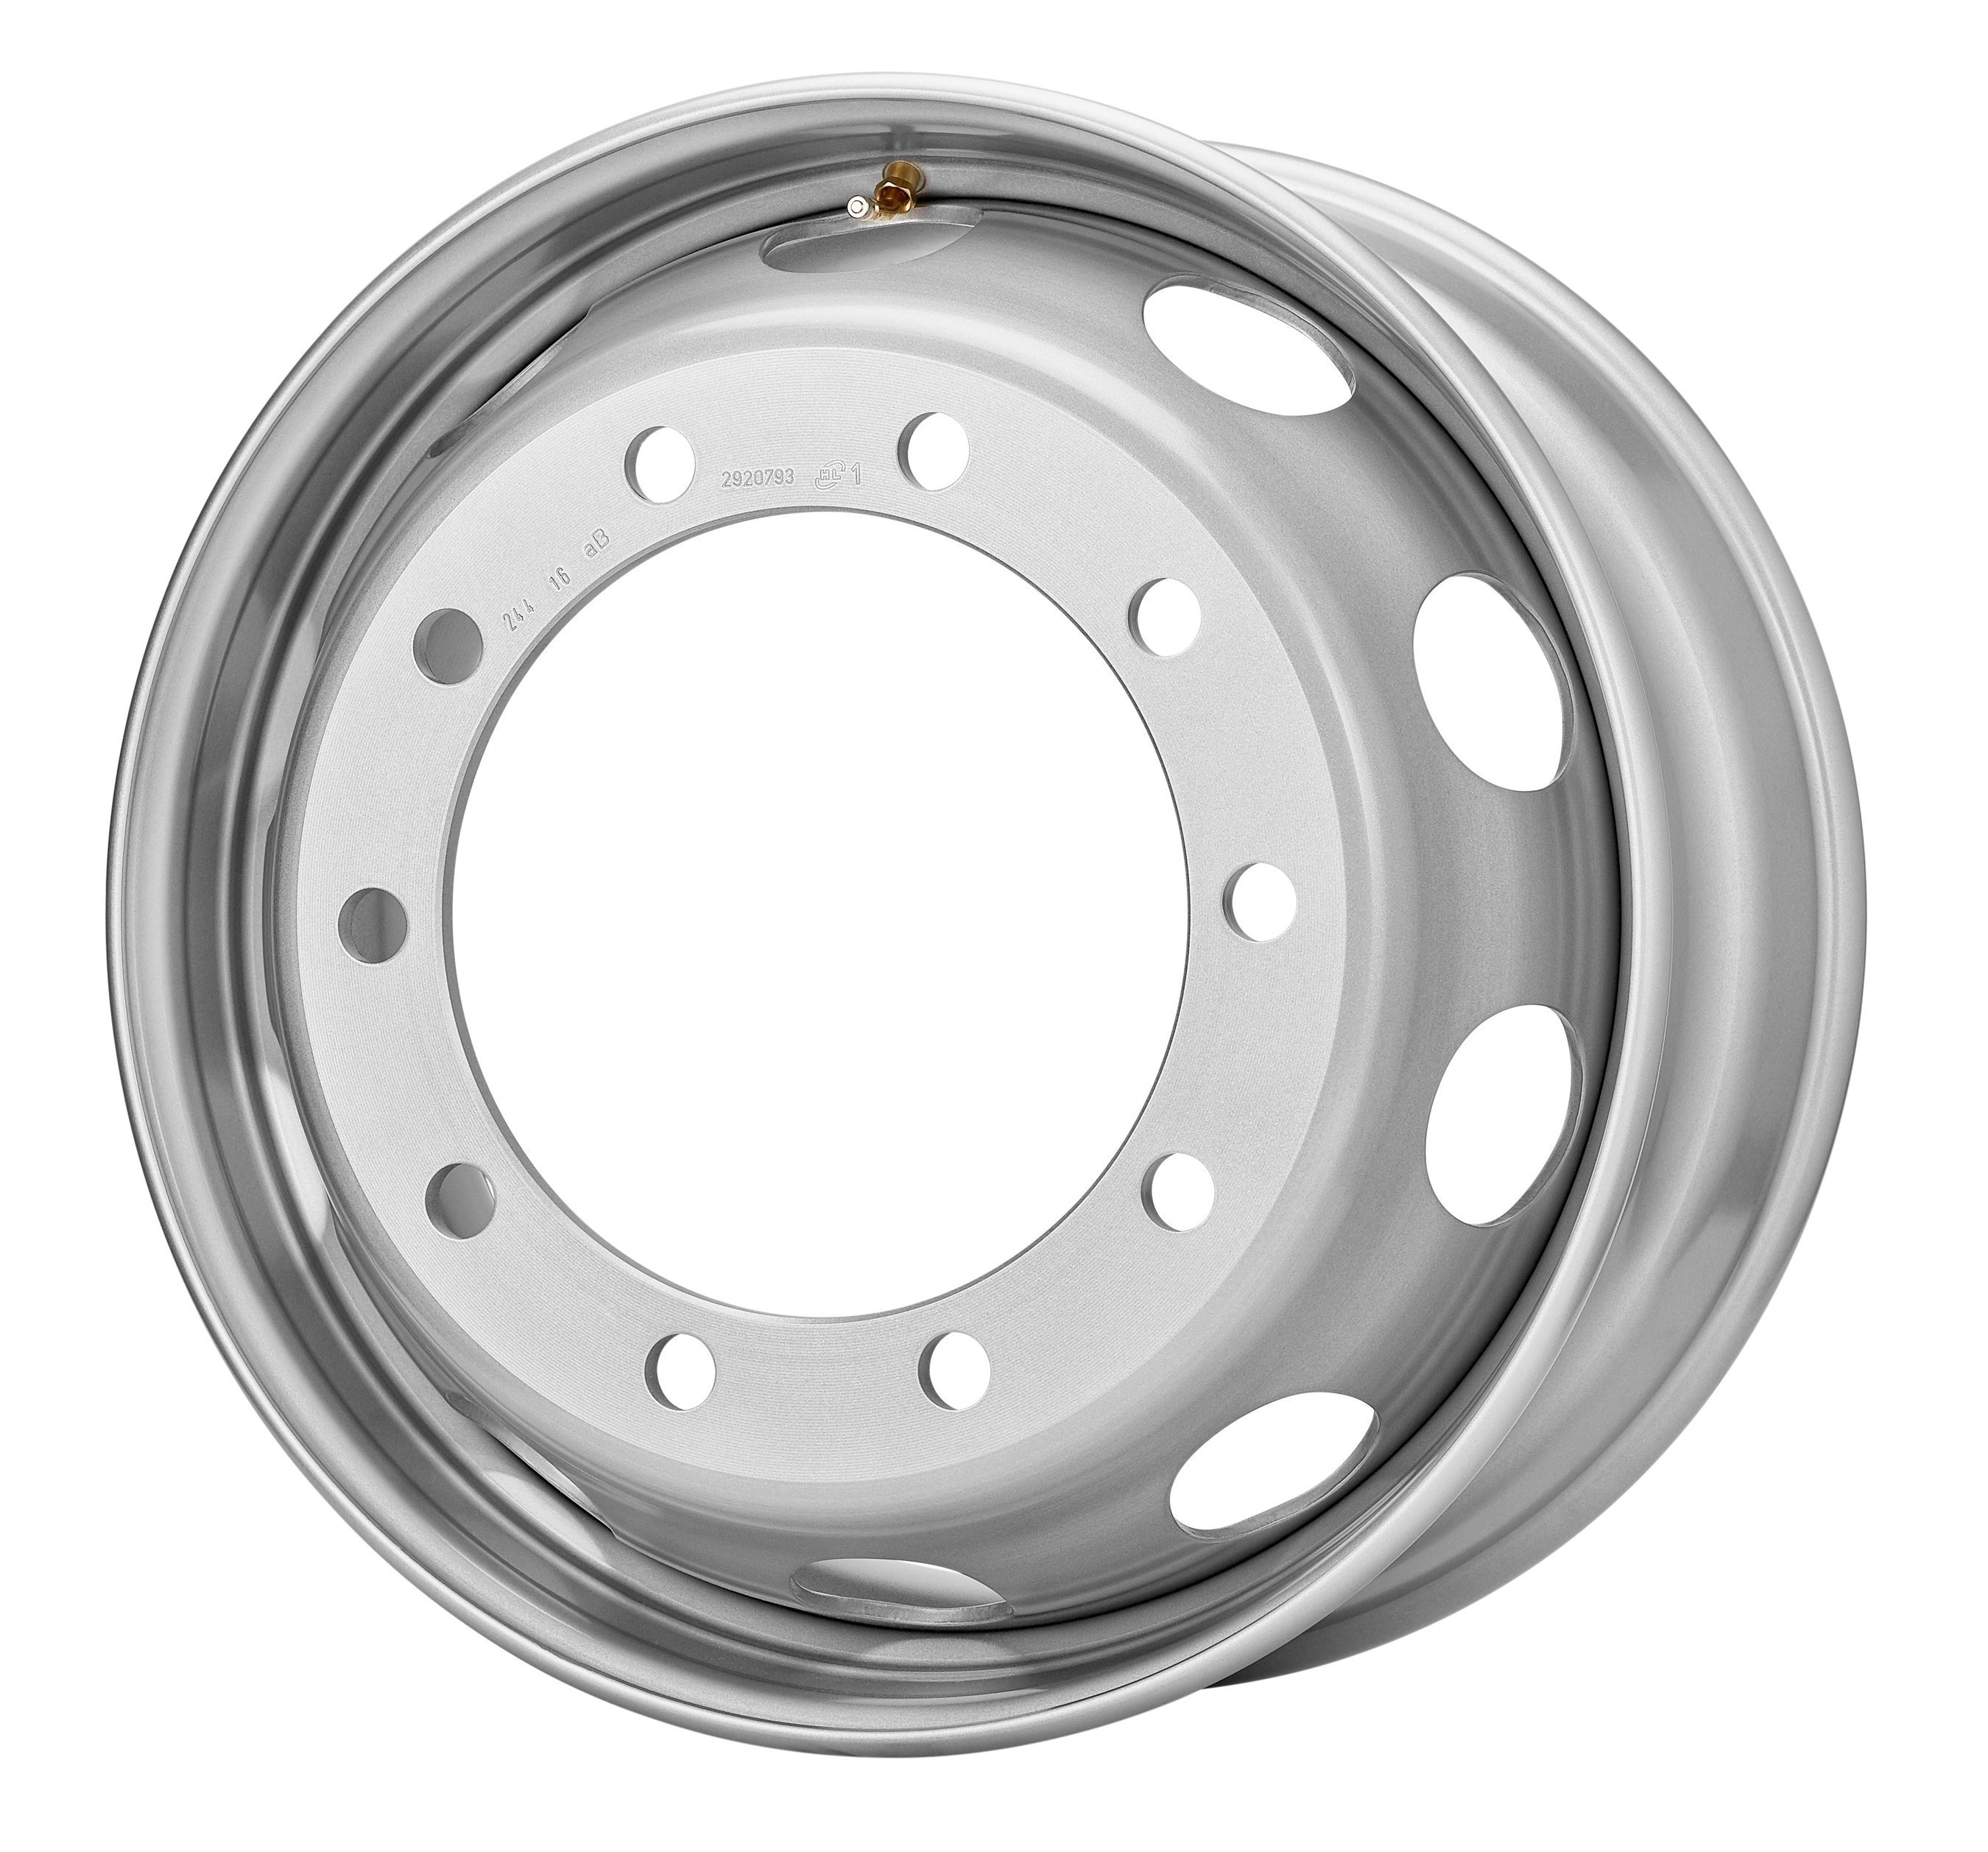 The Gen34 22.5" x 9.0" steel wheel is Maxion Wheels' newest commercial vehicle steel wheel weighing in at 34 kilograms (kg), a reduction of two kilograms from its previous model.